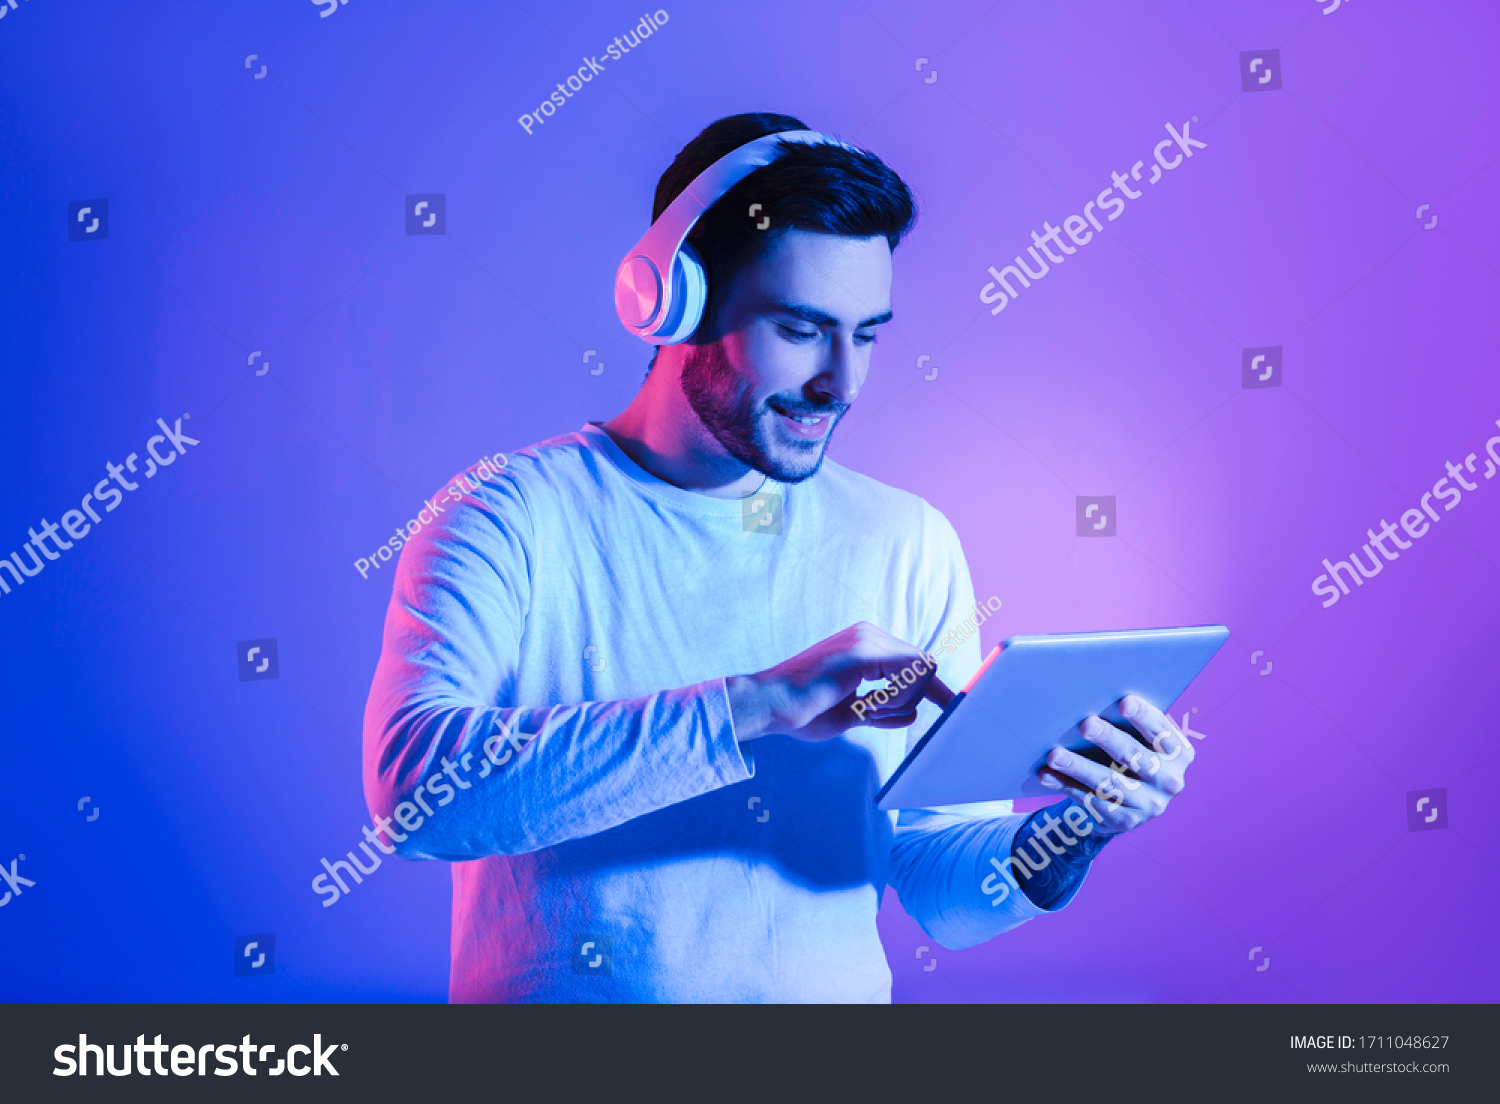 Modern gadgets for joy concept. Happy man in wireless headphones uses tablet #1711048627